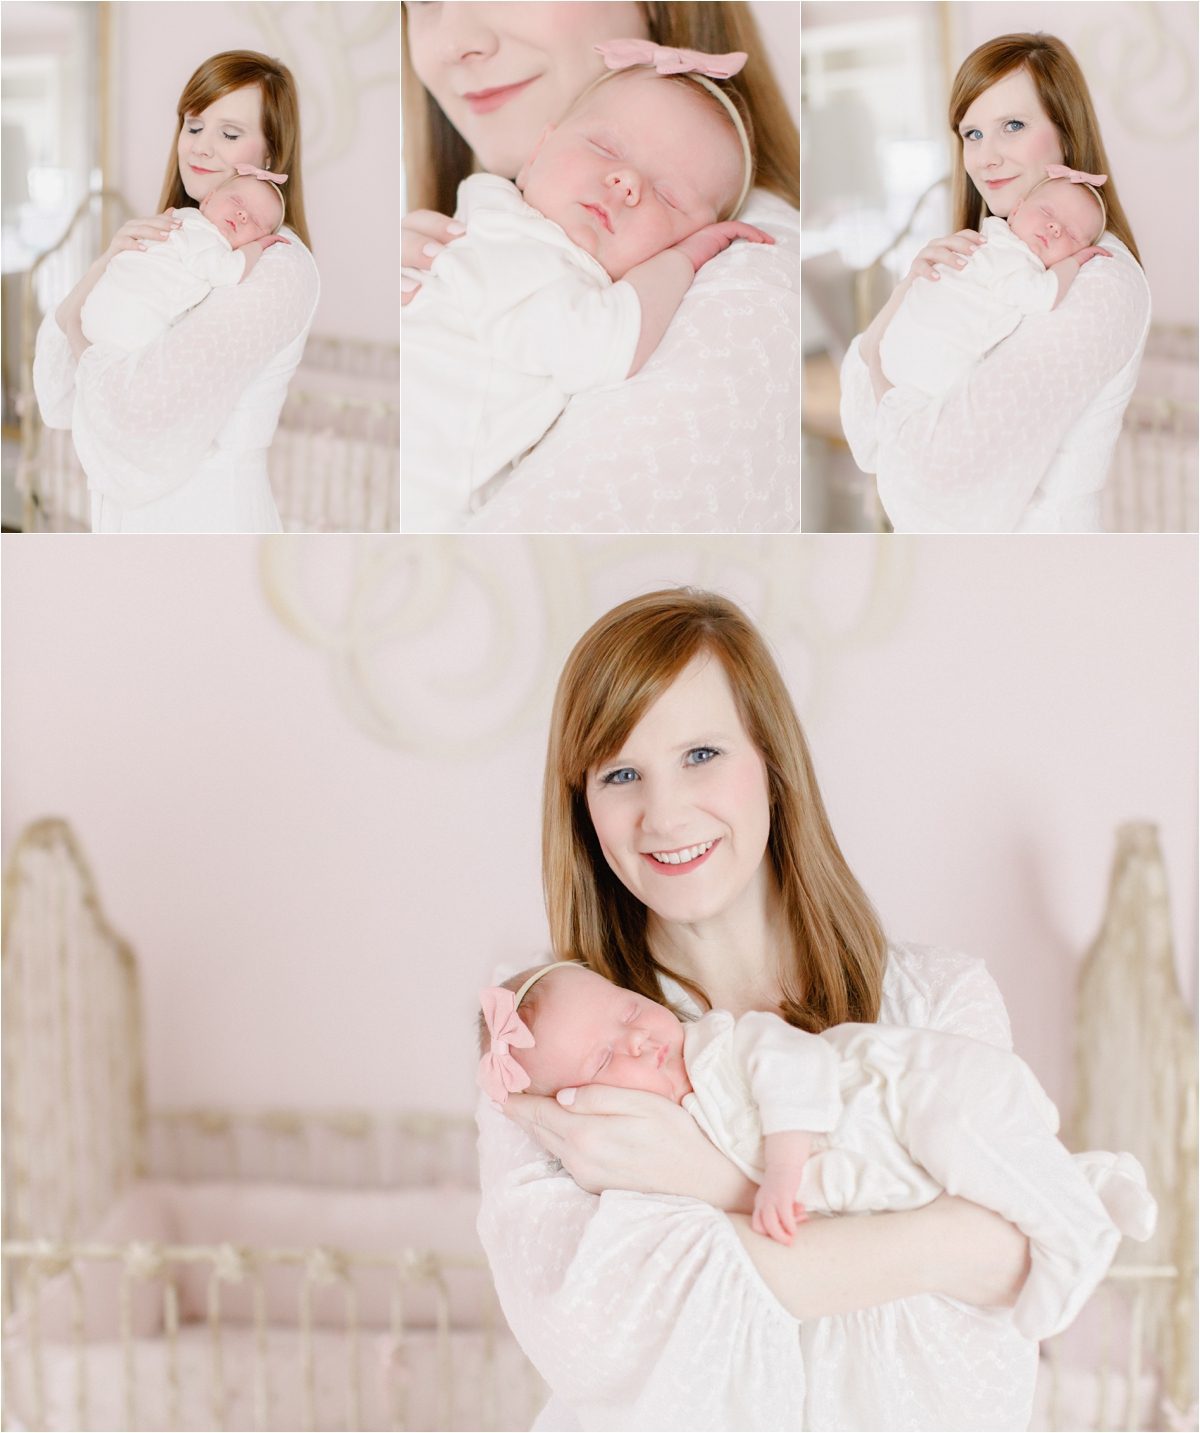 Lifestyle motherhood newborn pictures taken at home in Knoxville, TN.